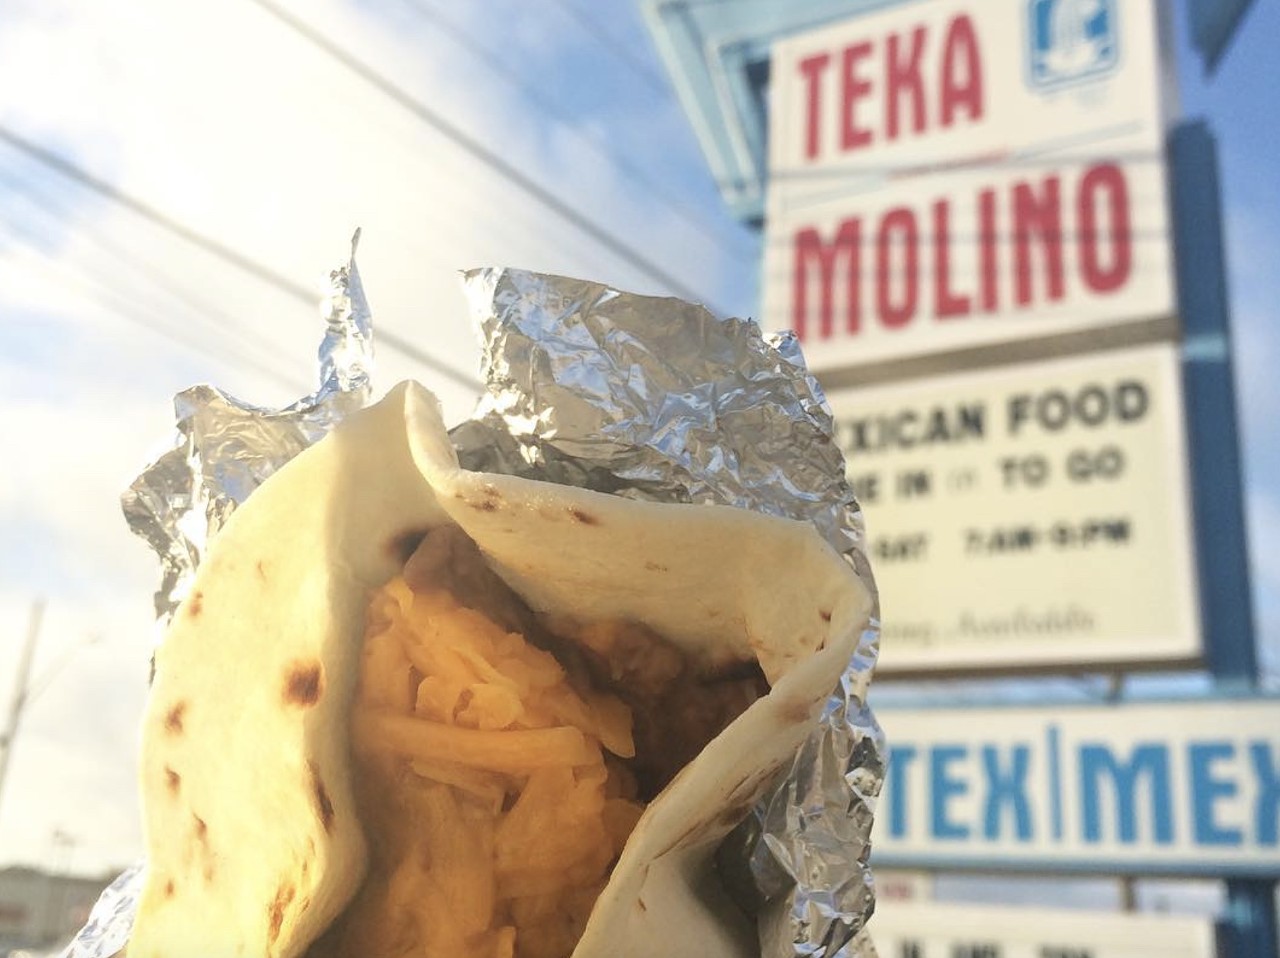 Don't visit any Tex-Mex restaurant that doesn't make its own flour tortillas.